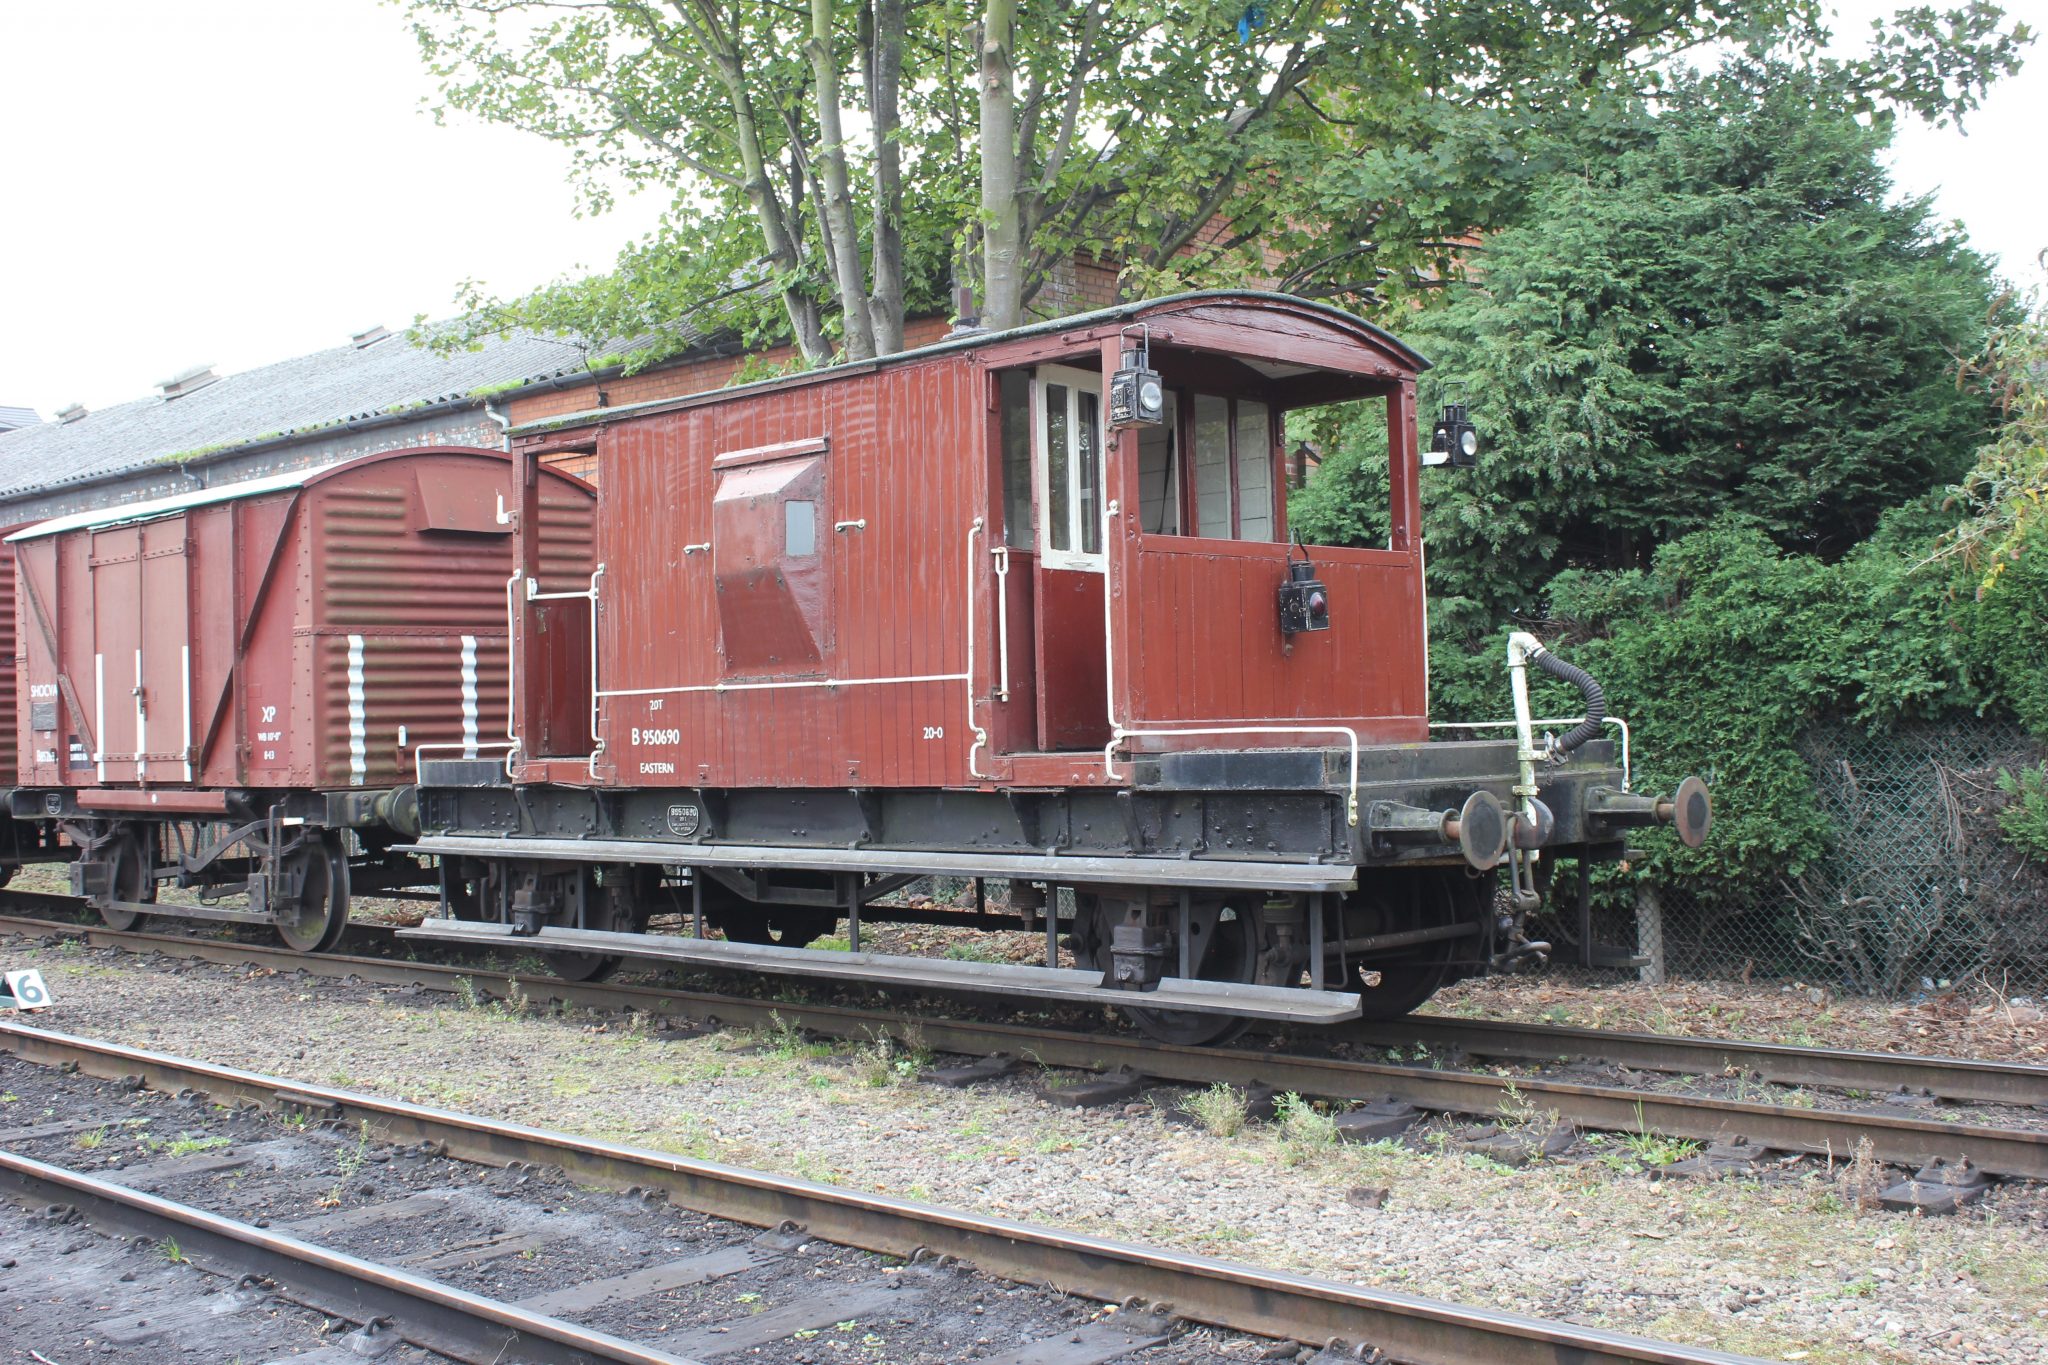 21 Ton brakevan showing tail lamp and side lamps